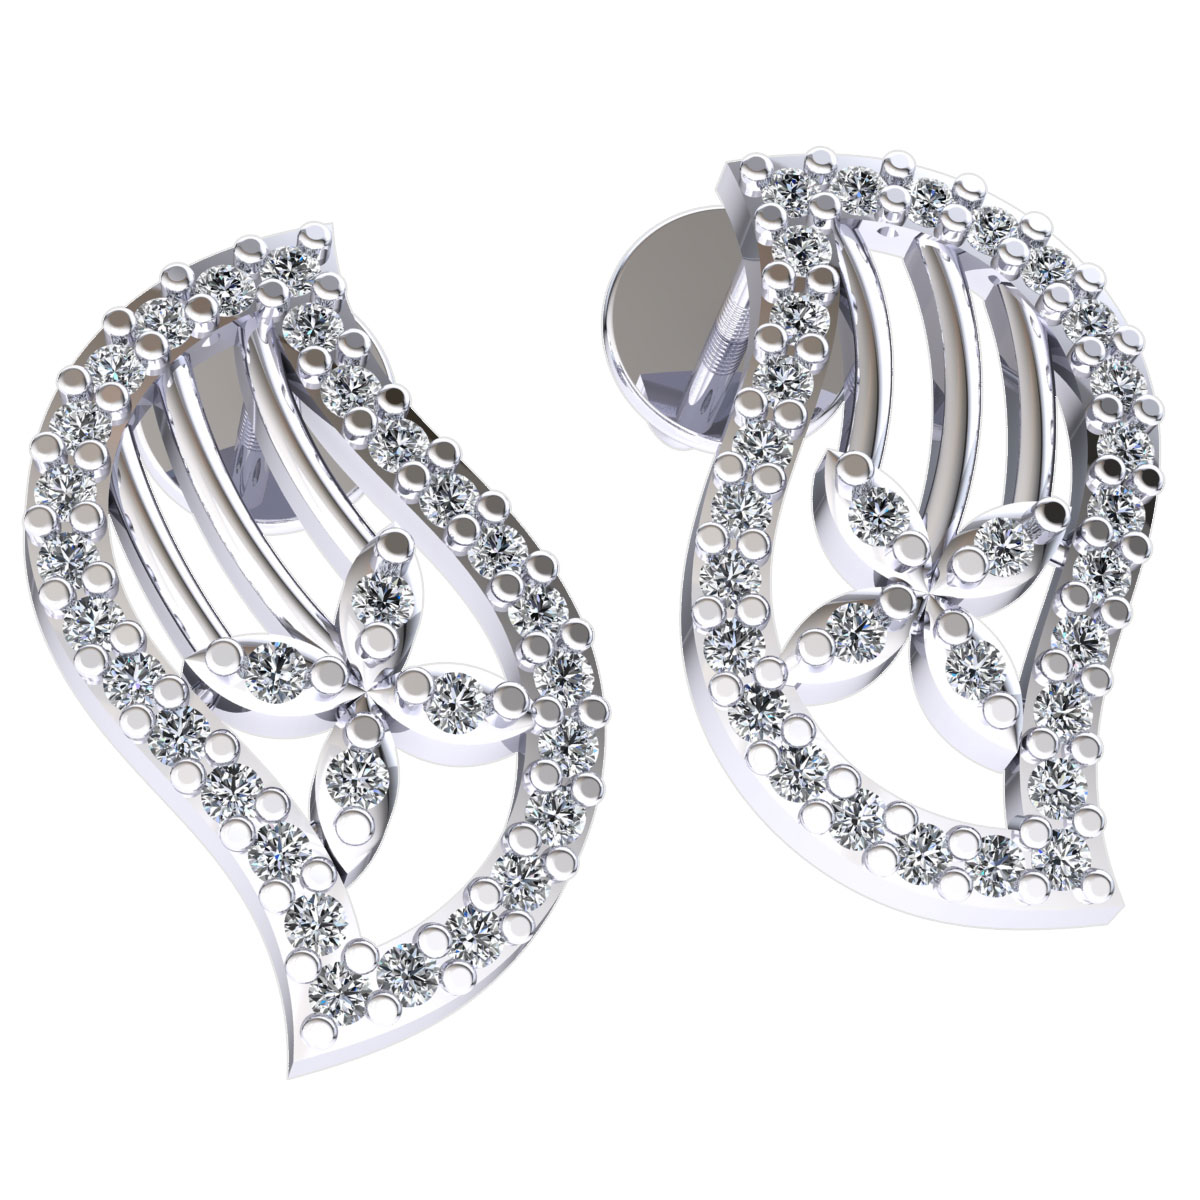 Jewel We Sell Natural 0.25carat Round Cut Diamond Ladies Small Drop Earrings Solid 14K White, Yellow or Rose Gold GH I1